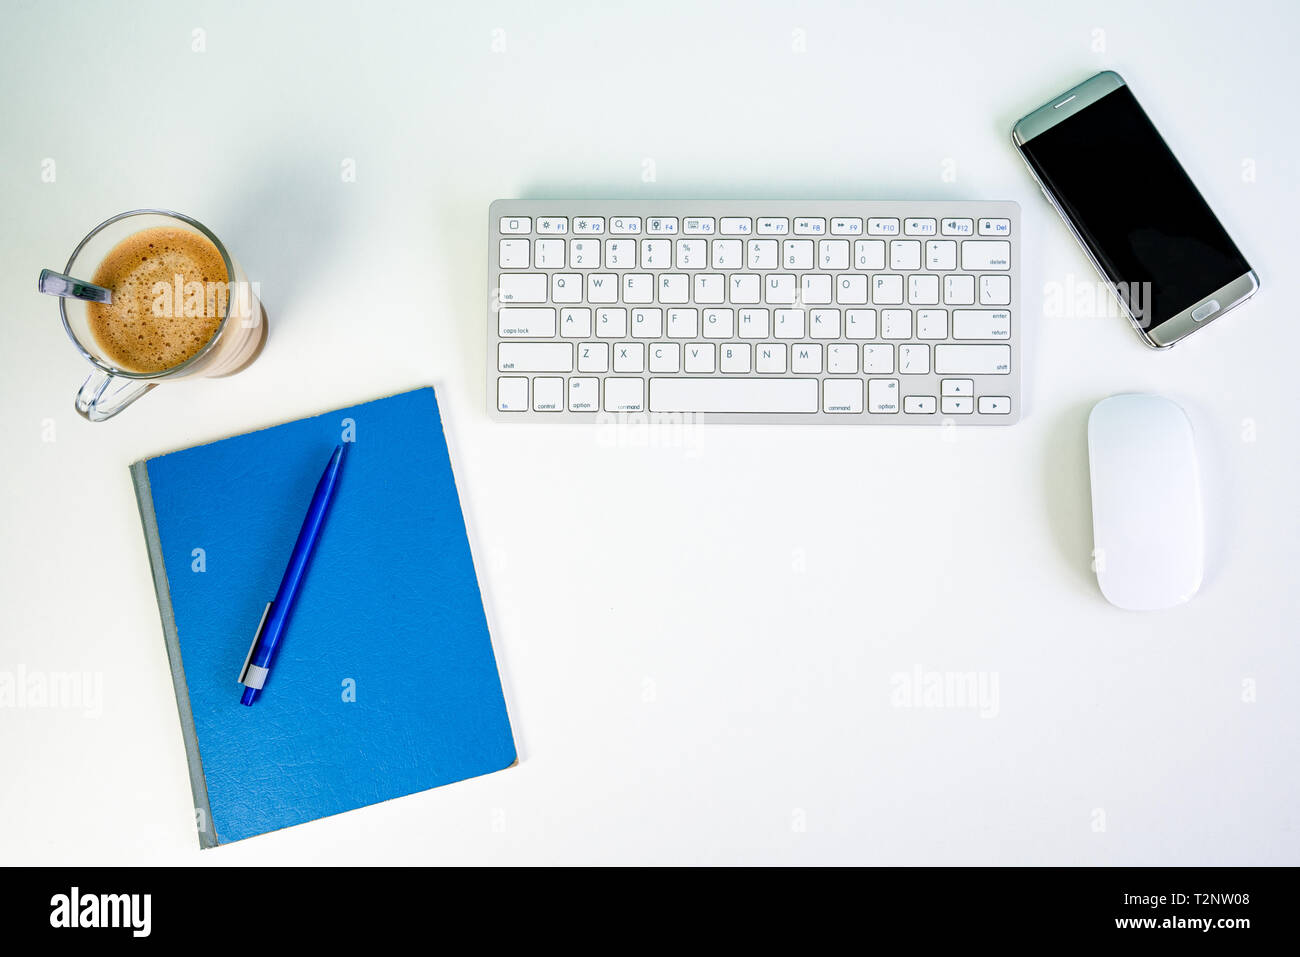 white office desk with wireless keyboard, mouse, smartphone, cup of coffee, pencil and a writing block Stock Photo